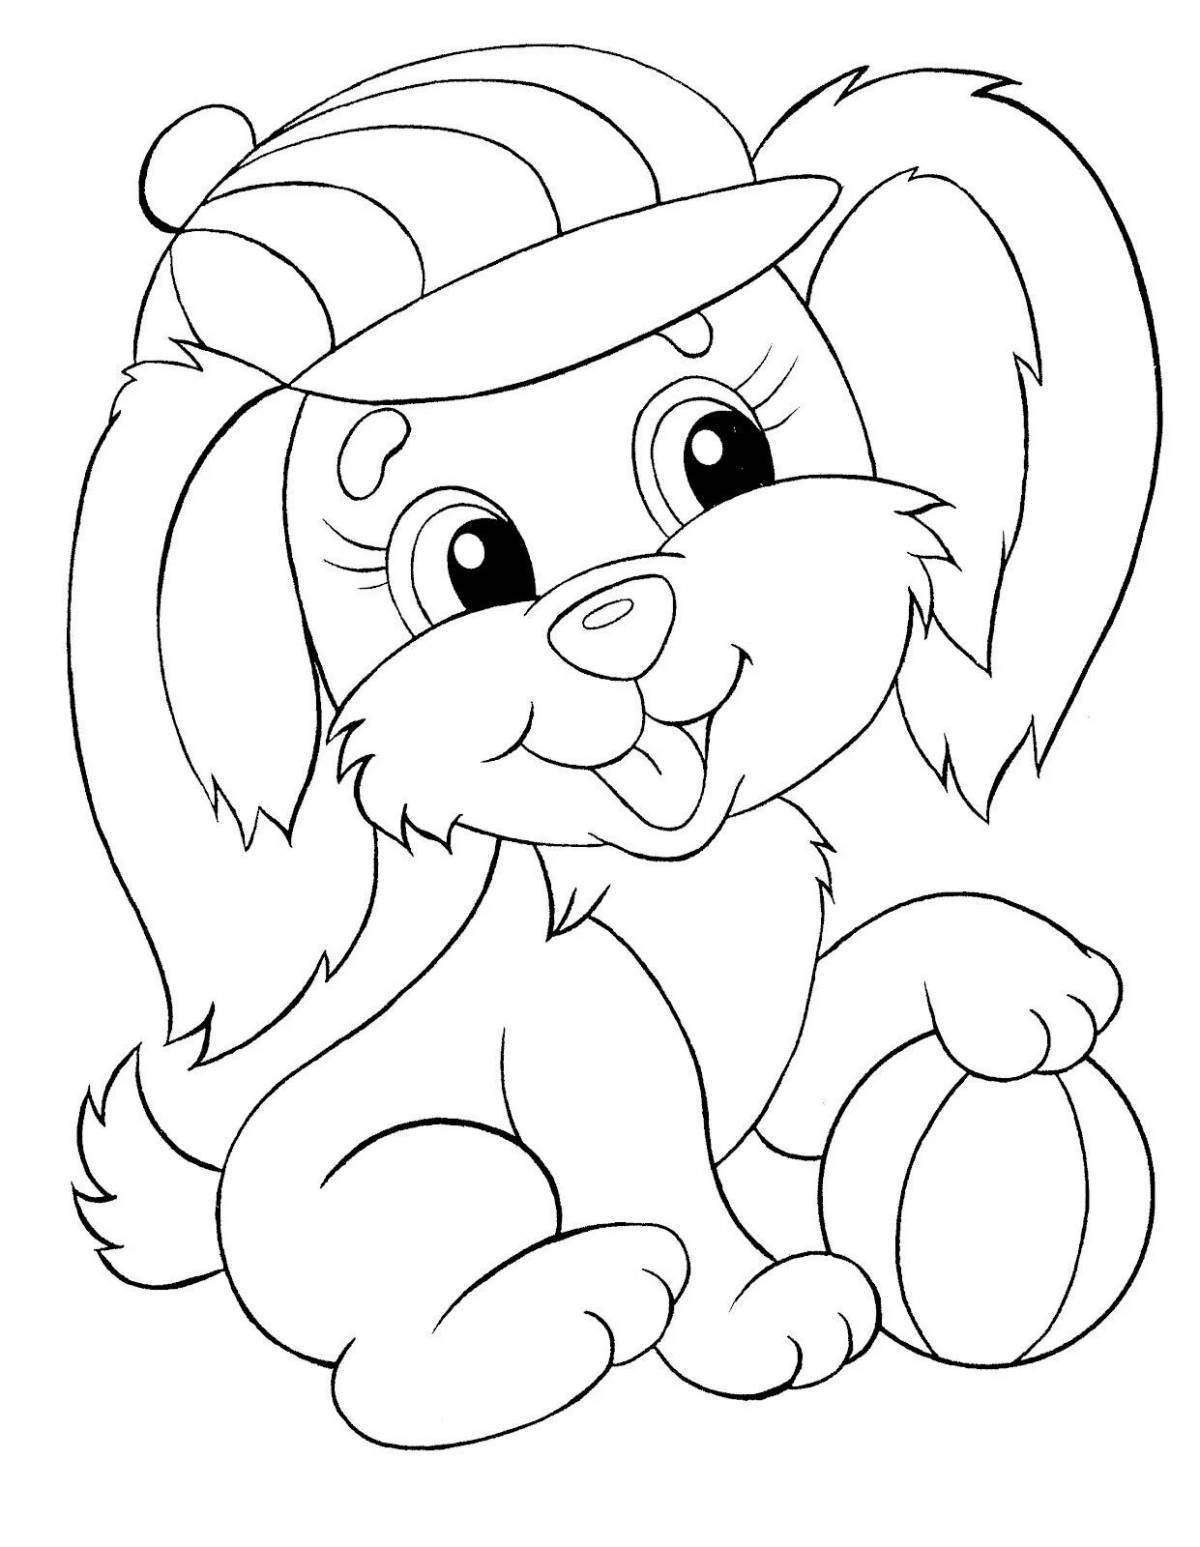 Bright coloring page loading